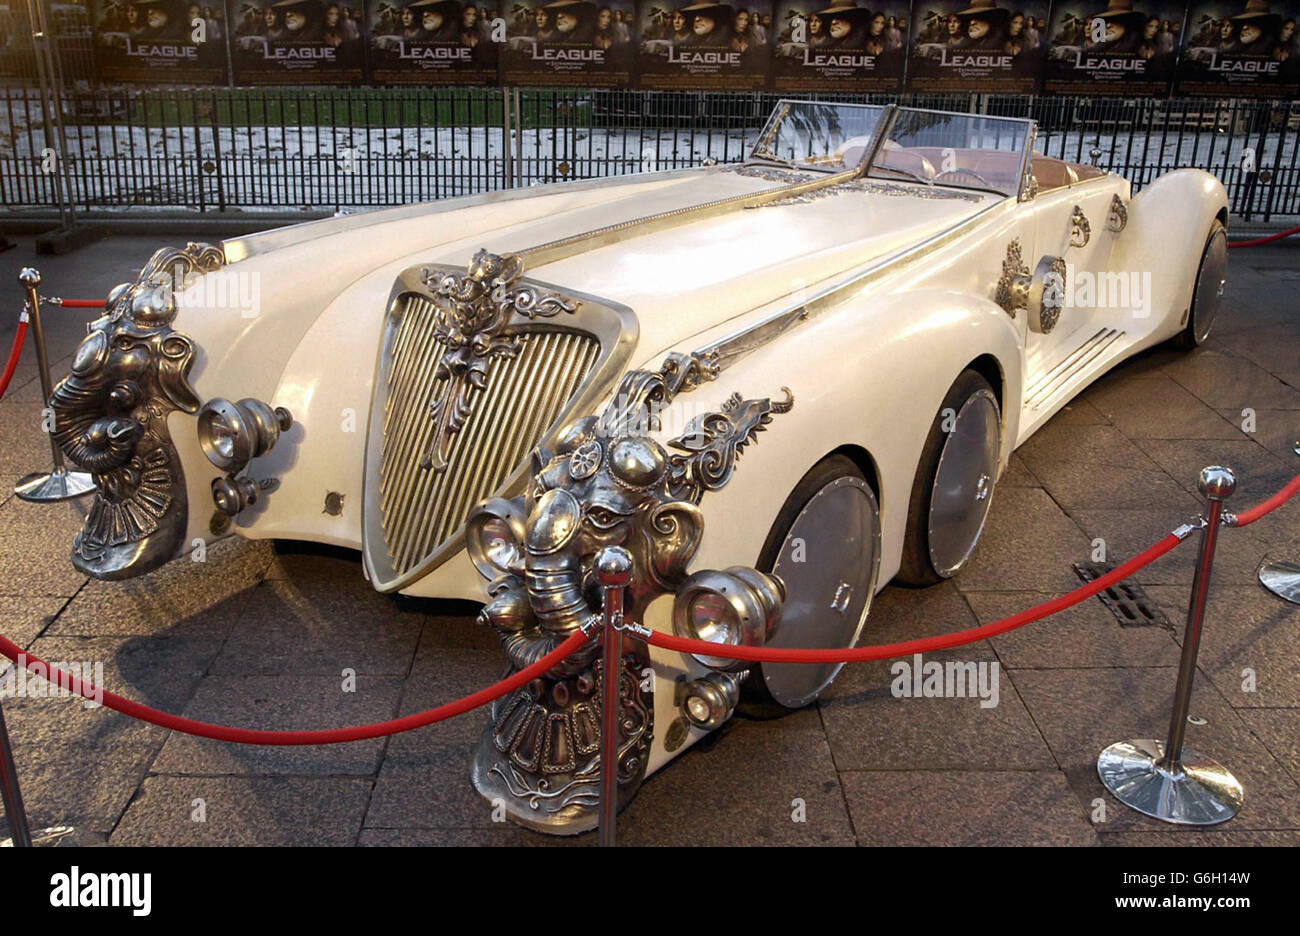 The car driven by Captain Nemo in the movie 'The League Of Extraordinary Gentlemen' displayed during the premiere at the Odeon Cinema in London's Leicester Square. Stock Photo